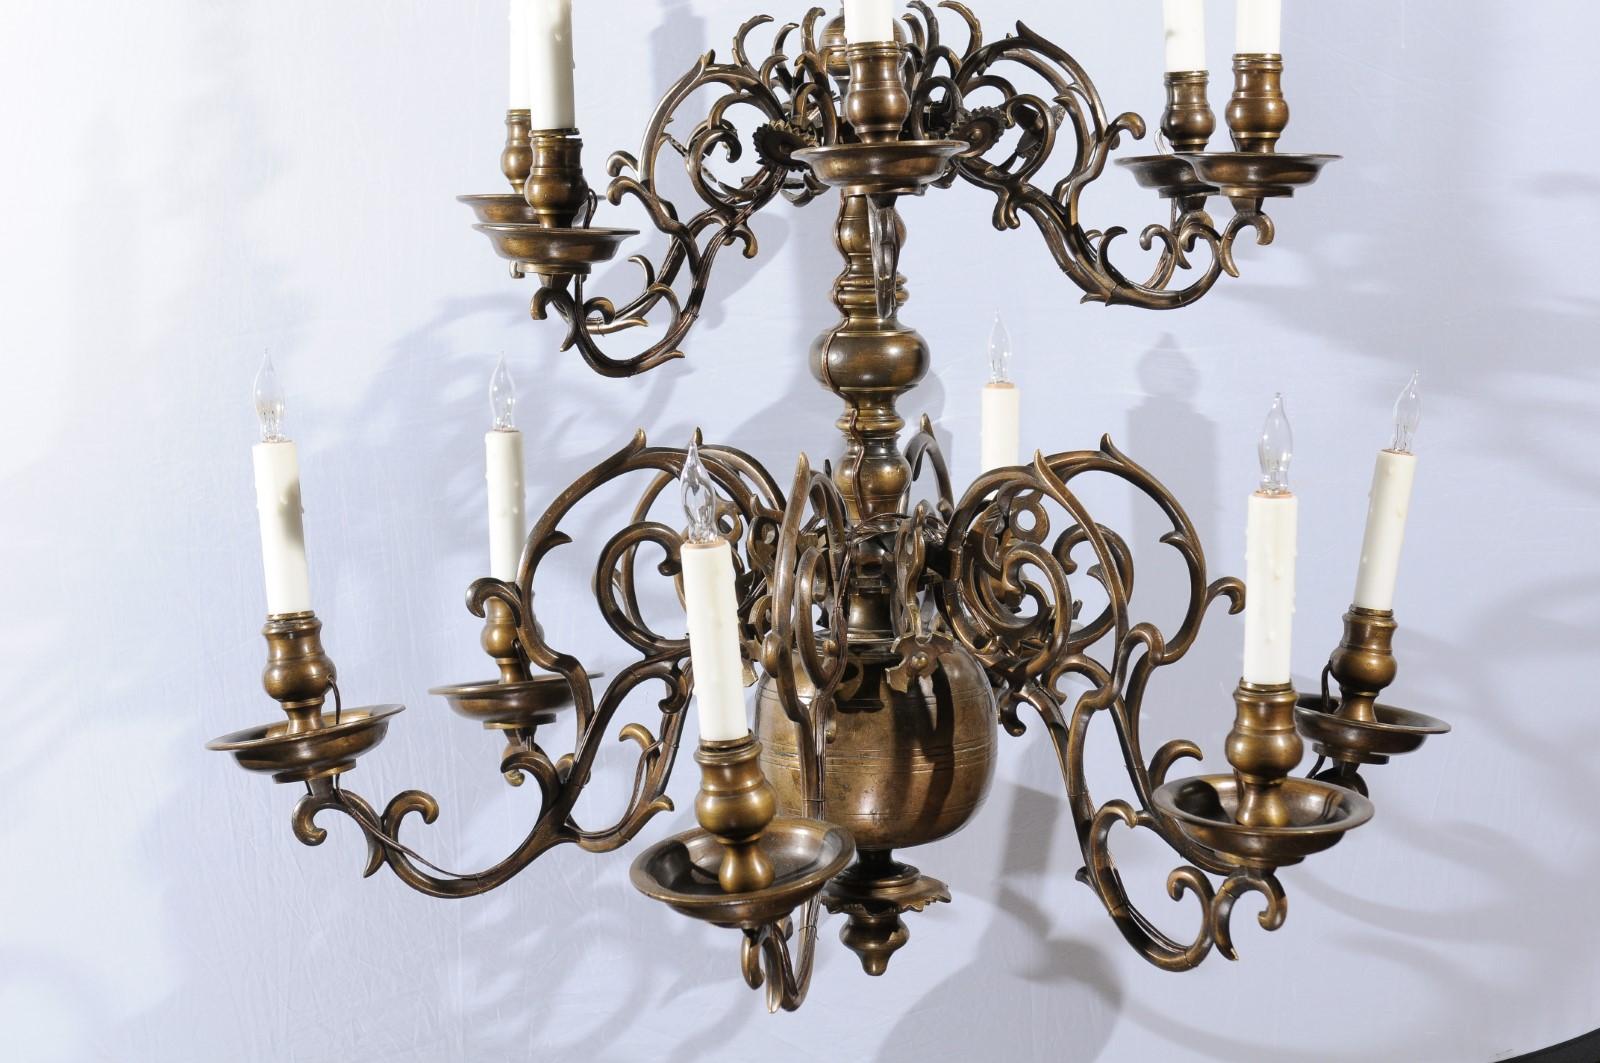 Large 2-Tier Dutch Brass Chandelier with 12 Lights, 18th Century For Sale 2